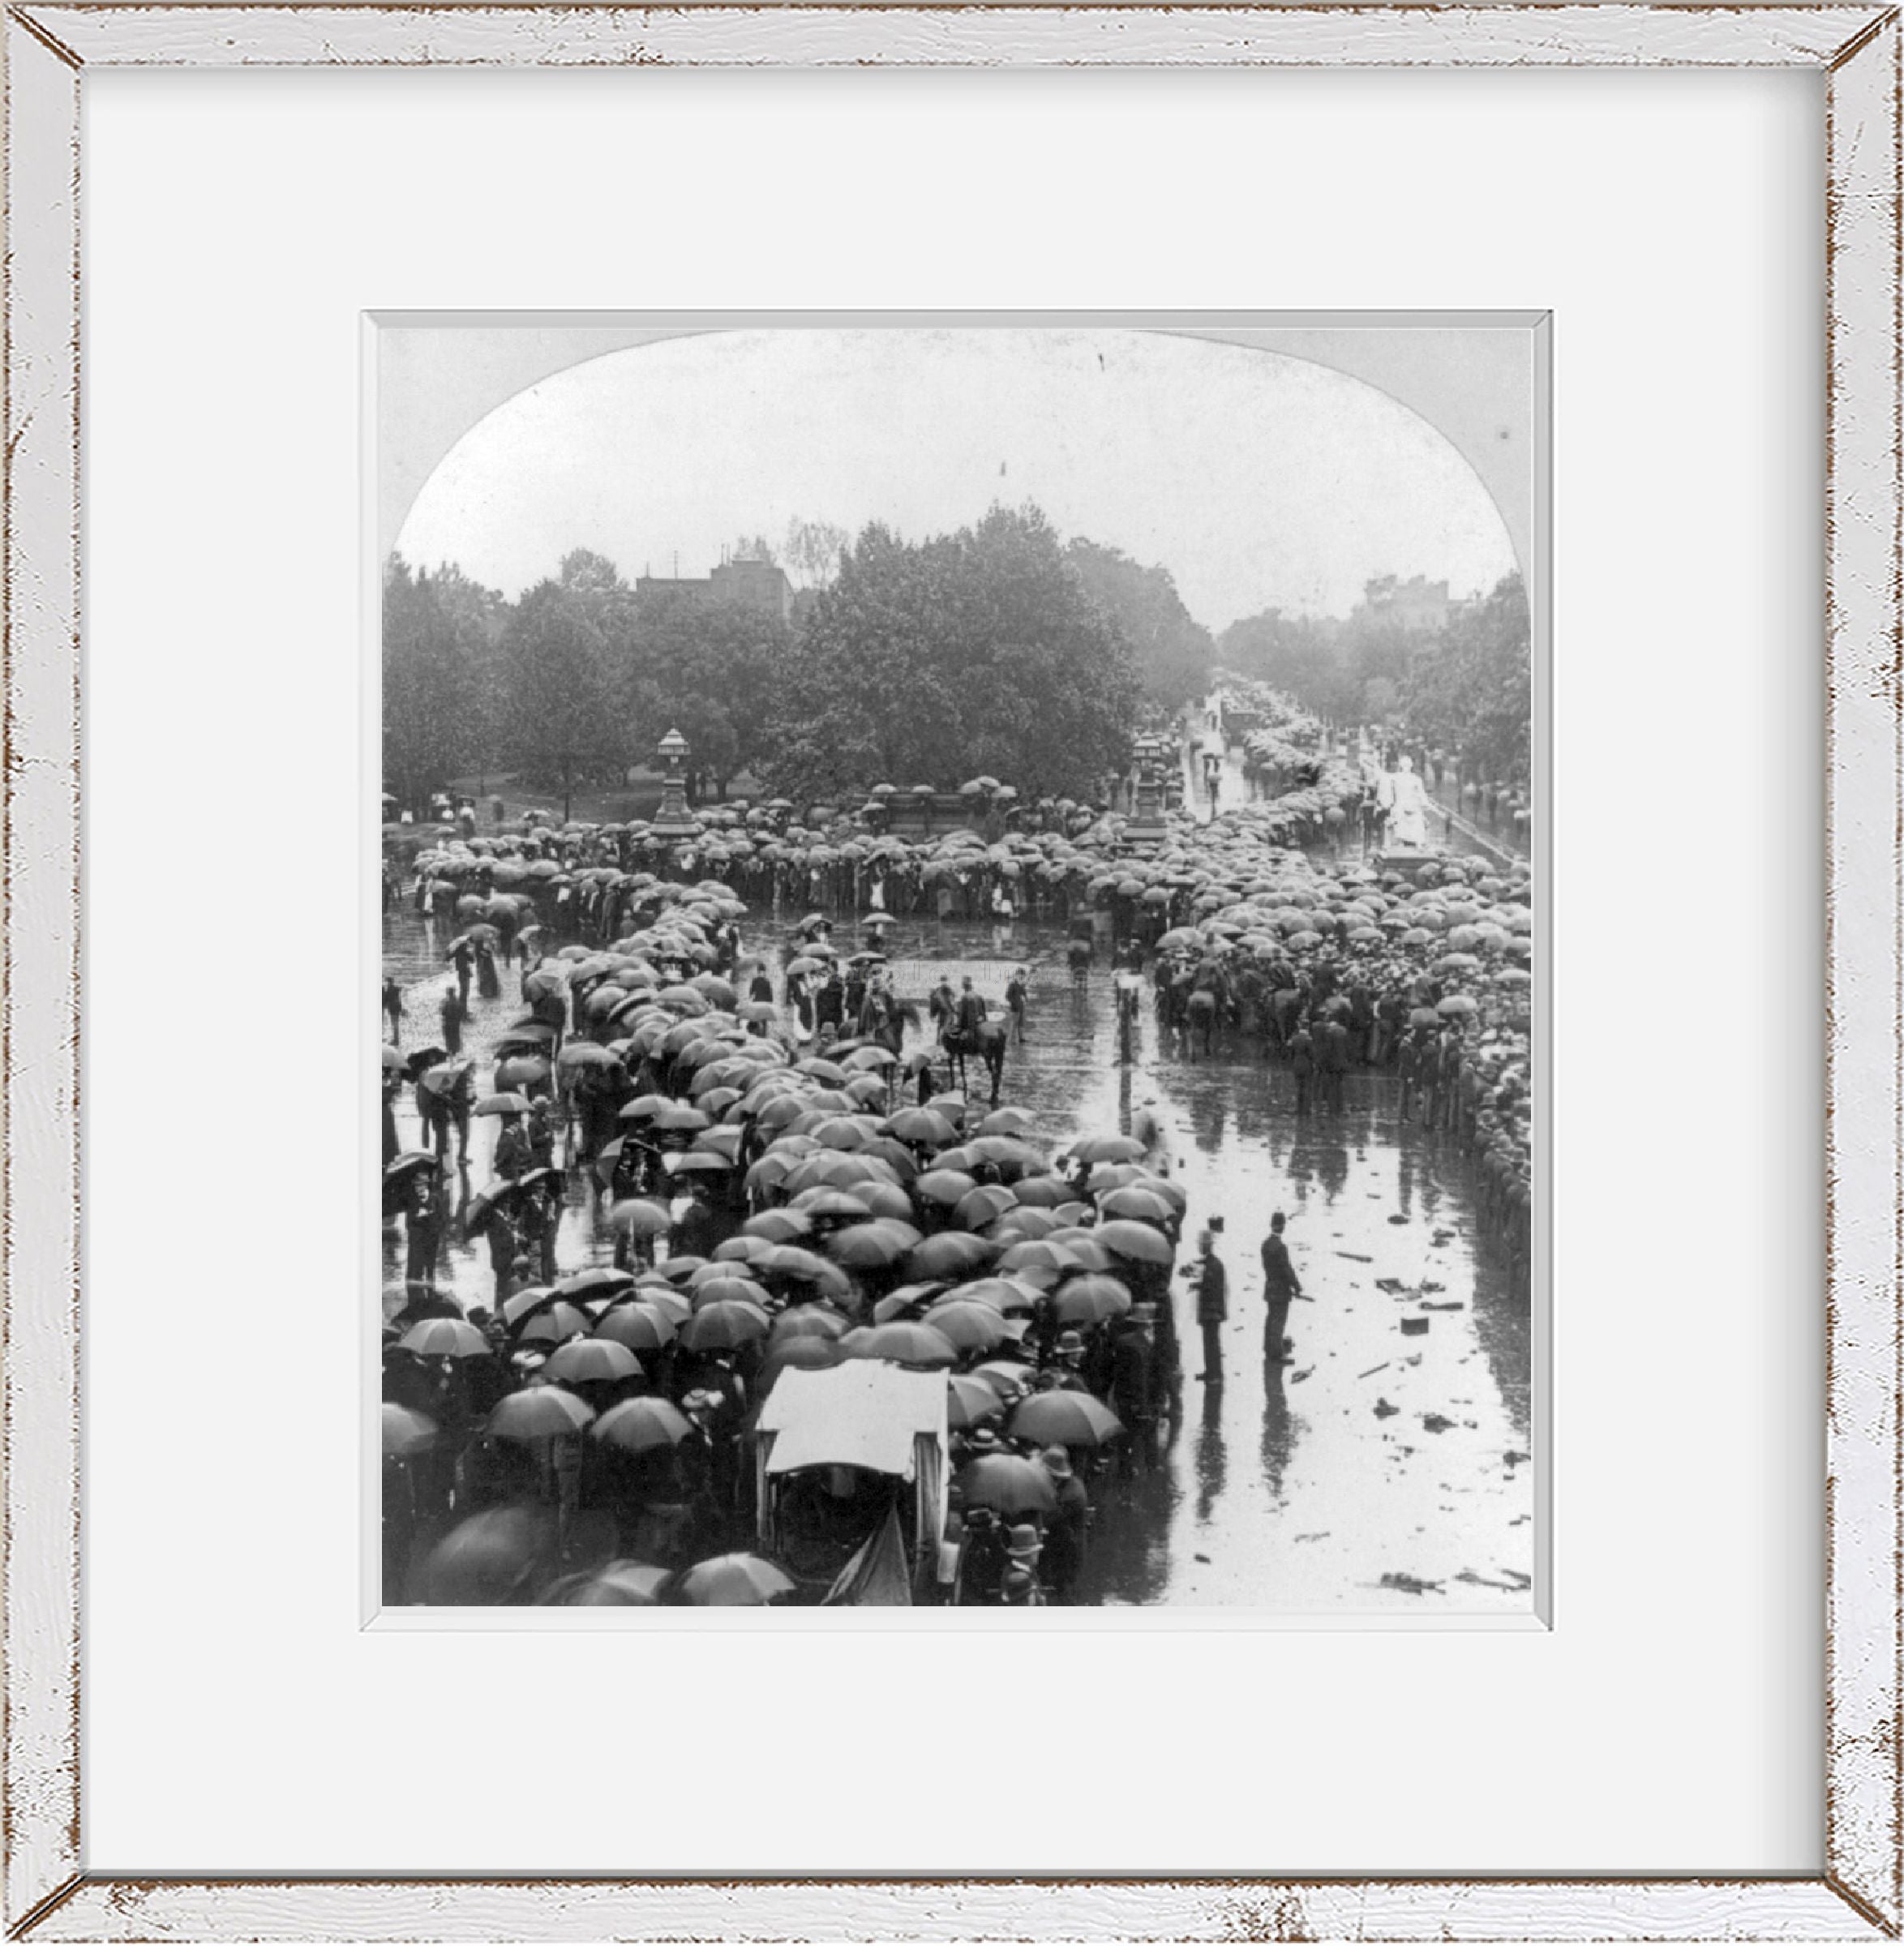 1901 Photo The funeral of President McKinley - crowd waiting for a last look at